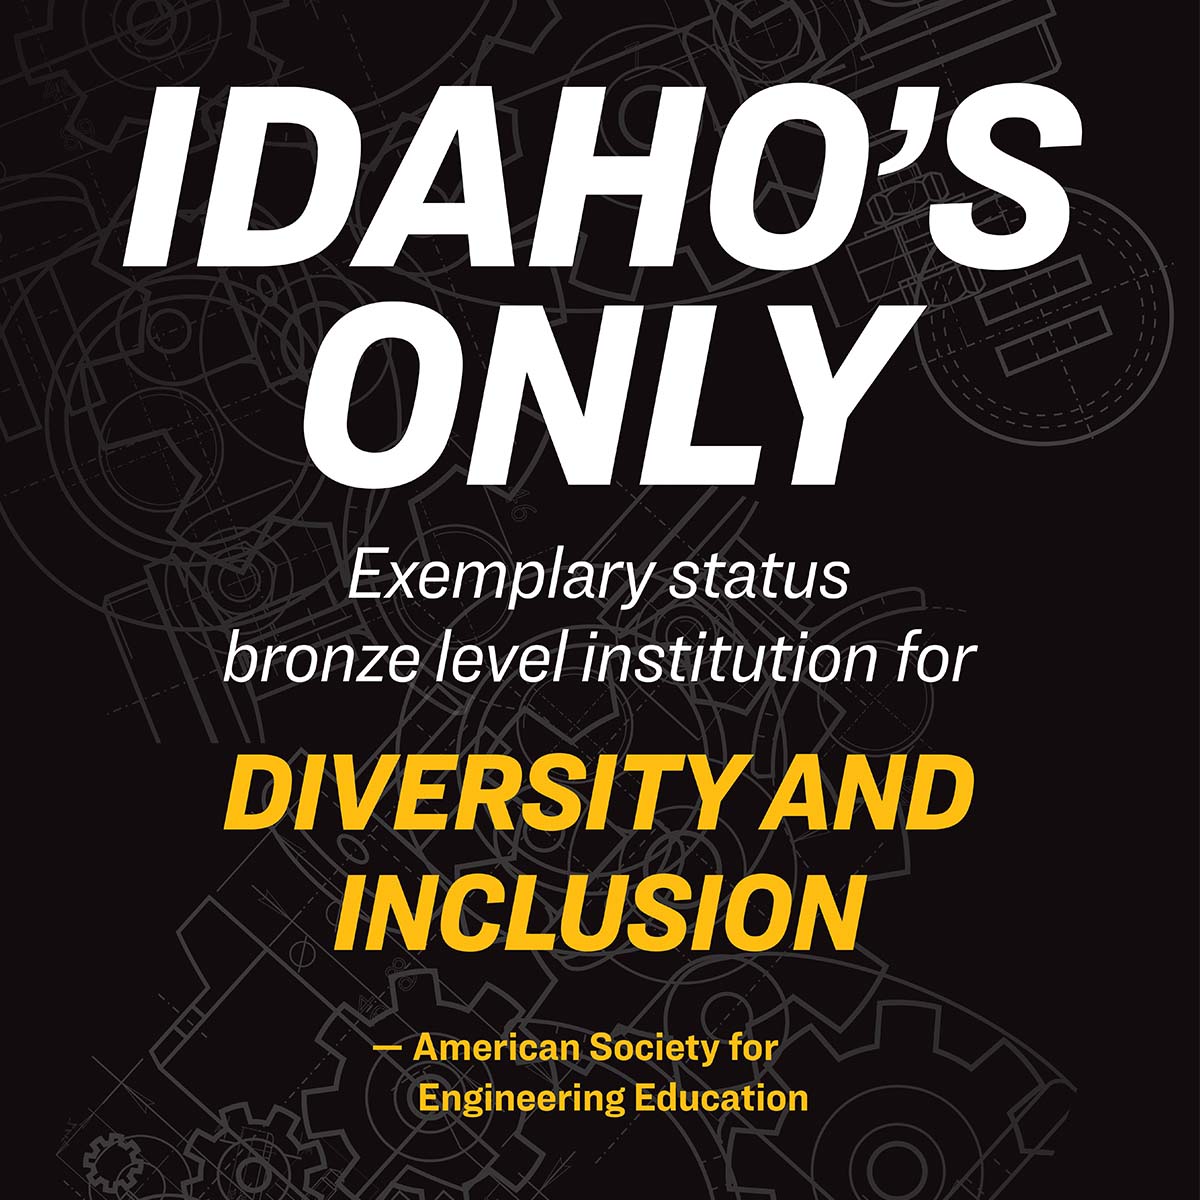 Idaho's only exemplary status bronze level institution for diversity and inclusion from the American Society for Engineering Education